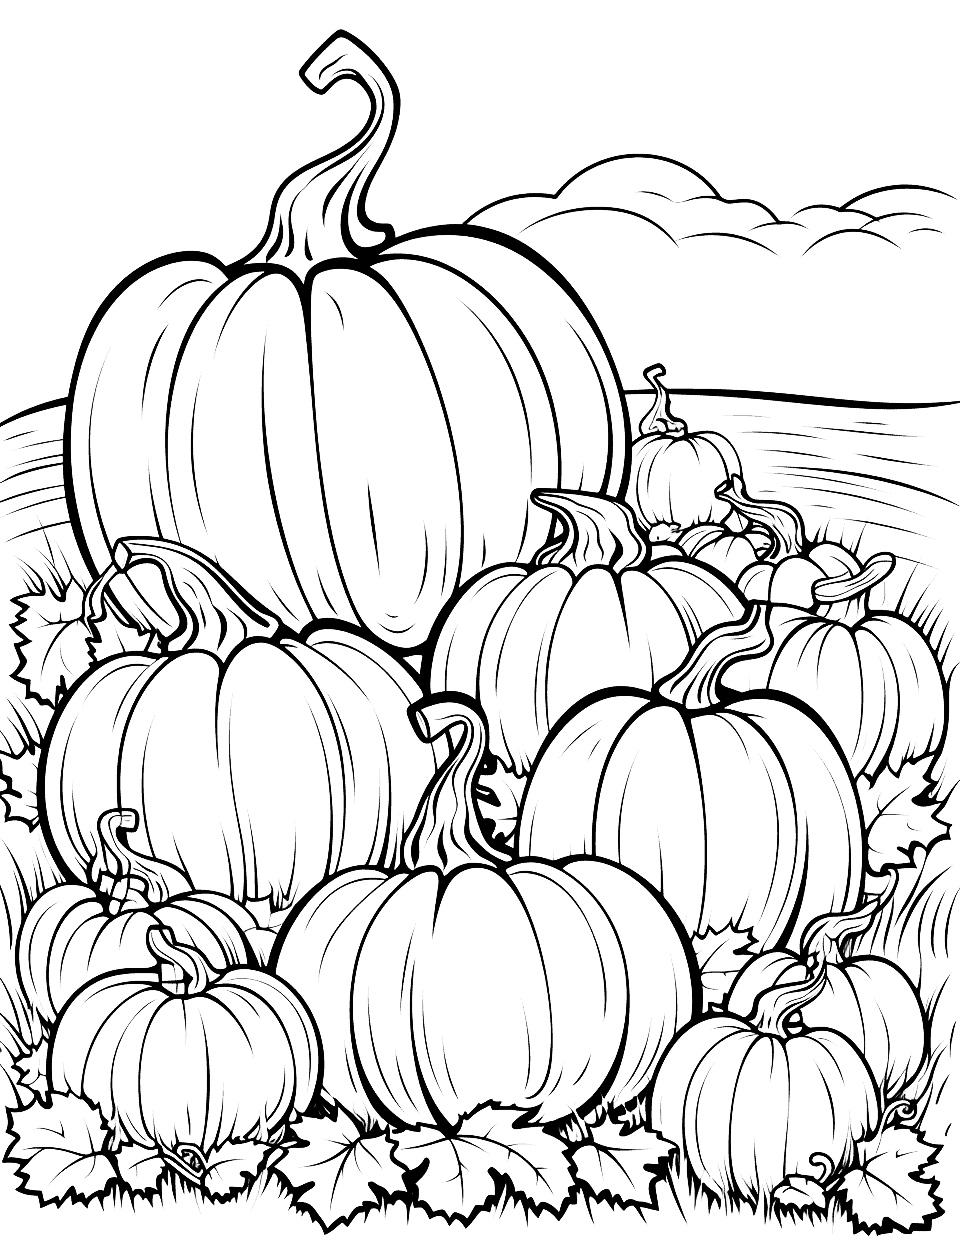 Pumpkin Patch Adventure Halloween Coloring Page - Various-sized pumpkins on a field, waiting to be colored in shades of orange, yellow, and green.